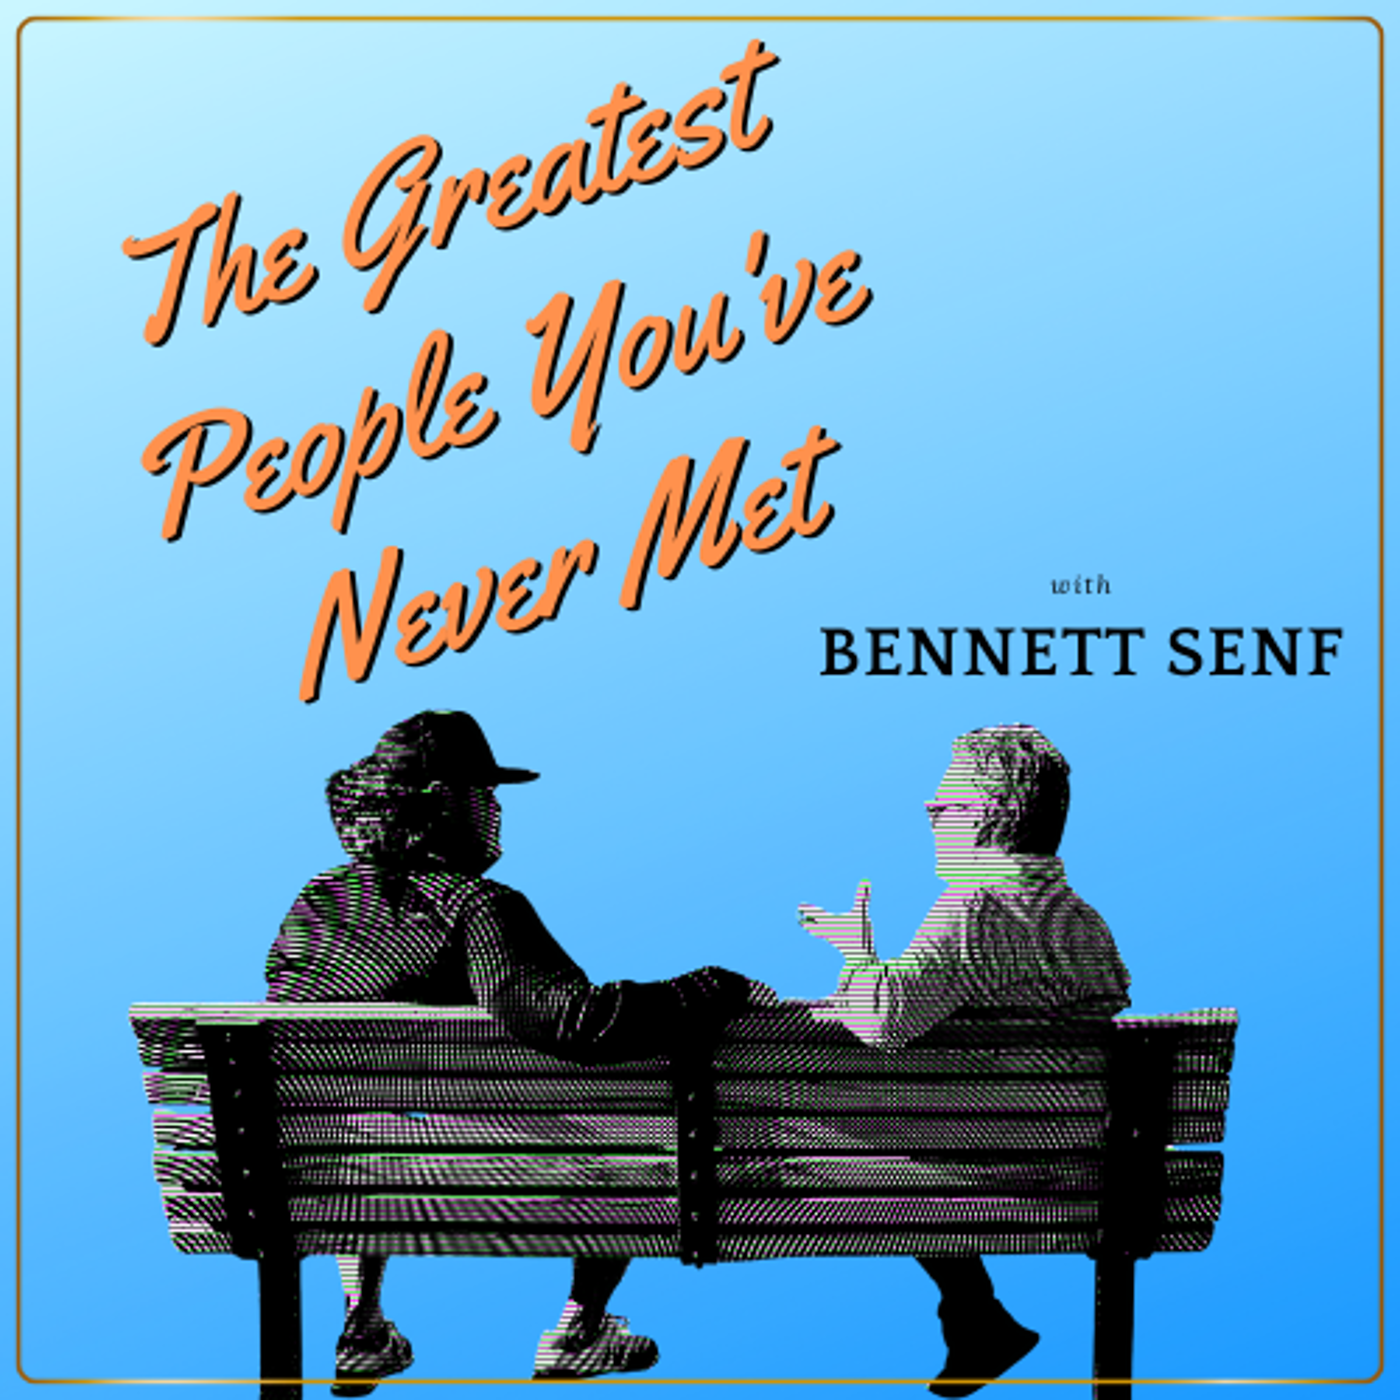 The Greatest People You’ve Never Met